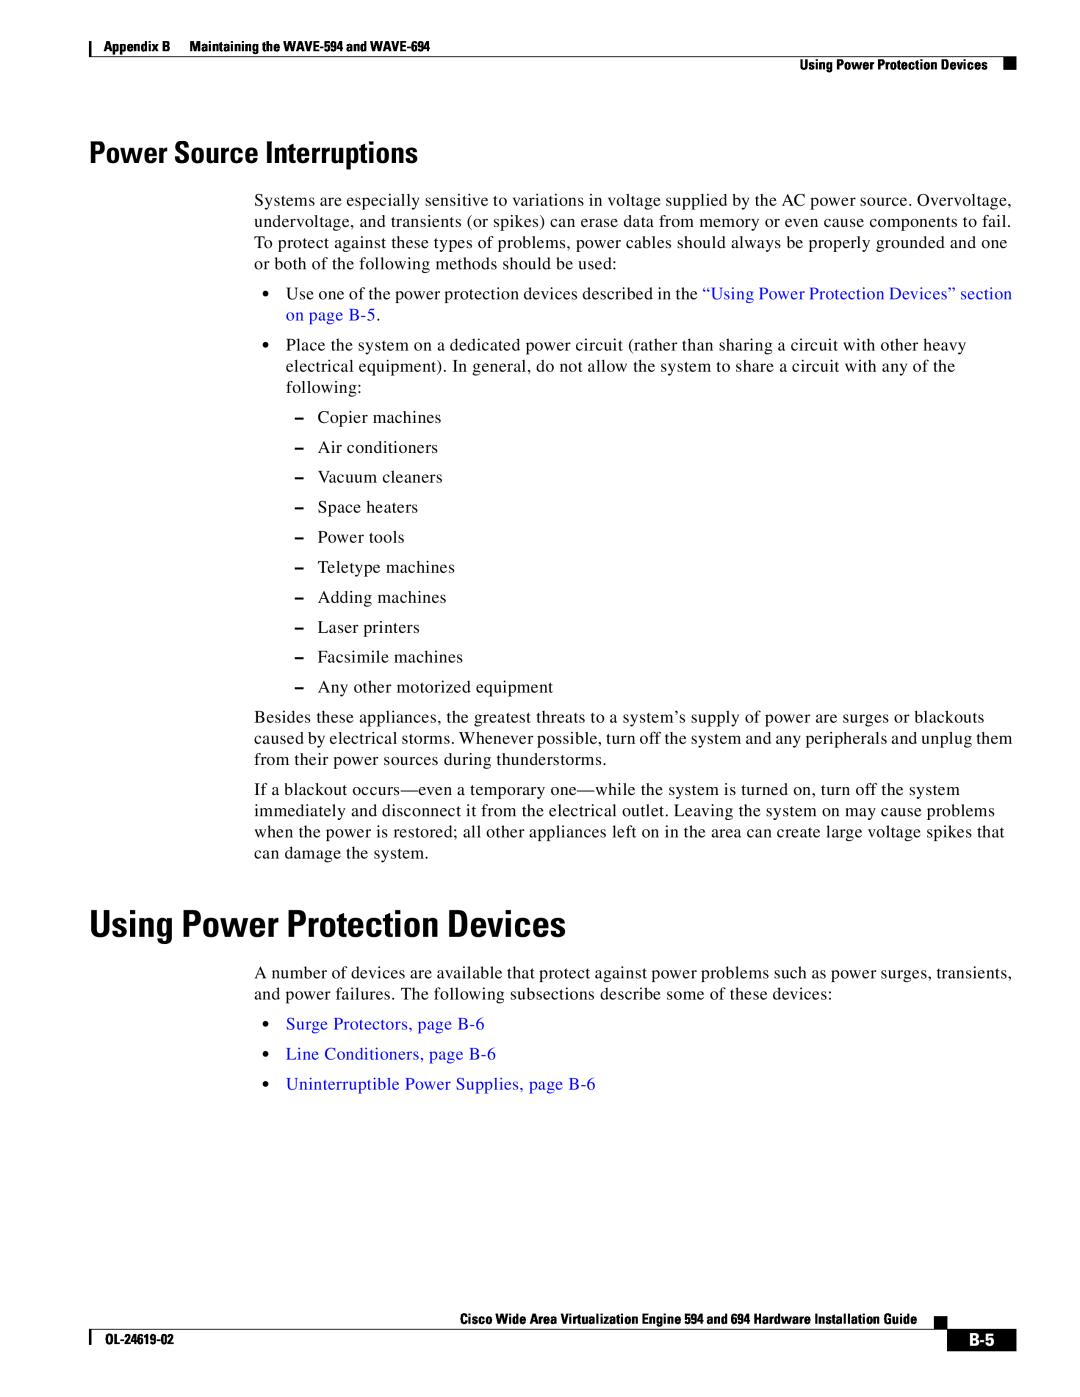 Cisco Systems 694 Using Power Protection Devices, Power Source Interruptions, Uninterruptible Power Supplies, page B-6 